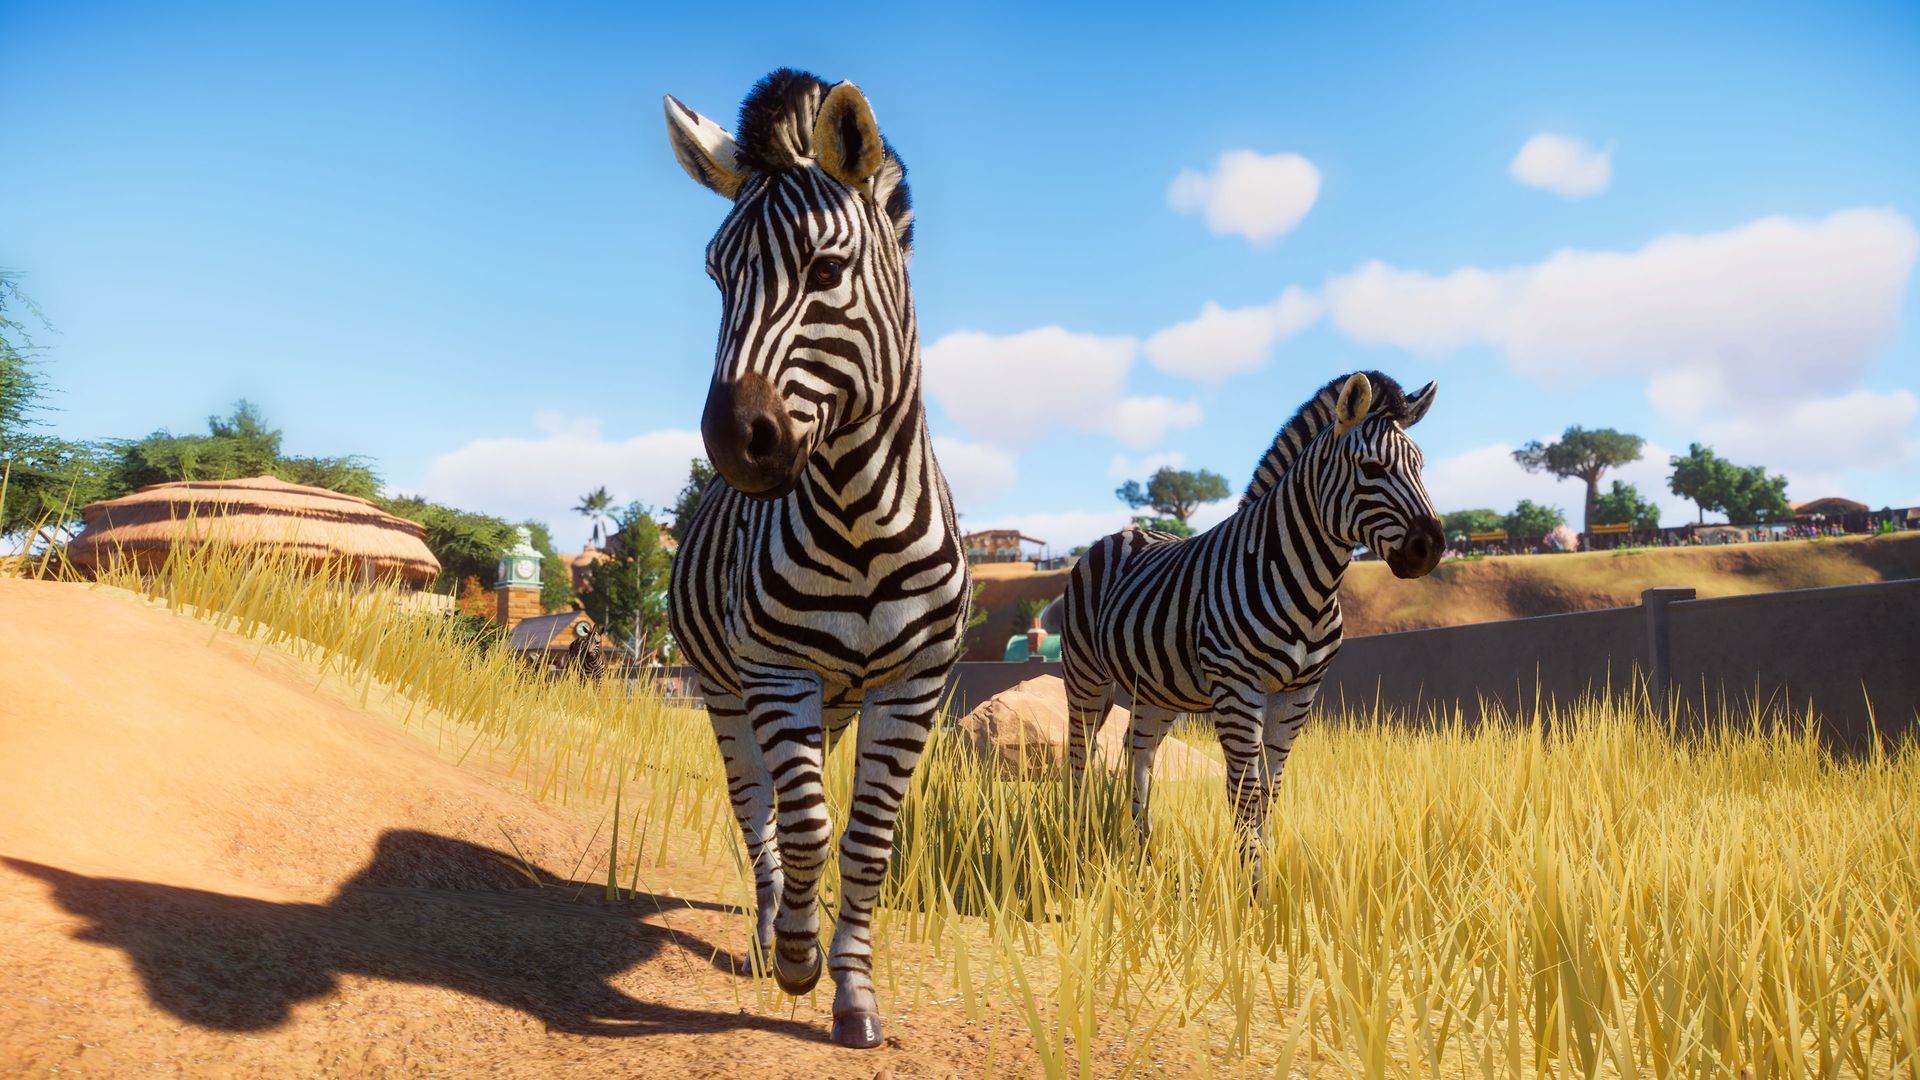 steam planet zoo download